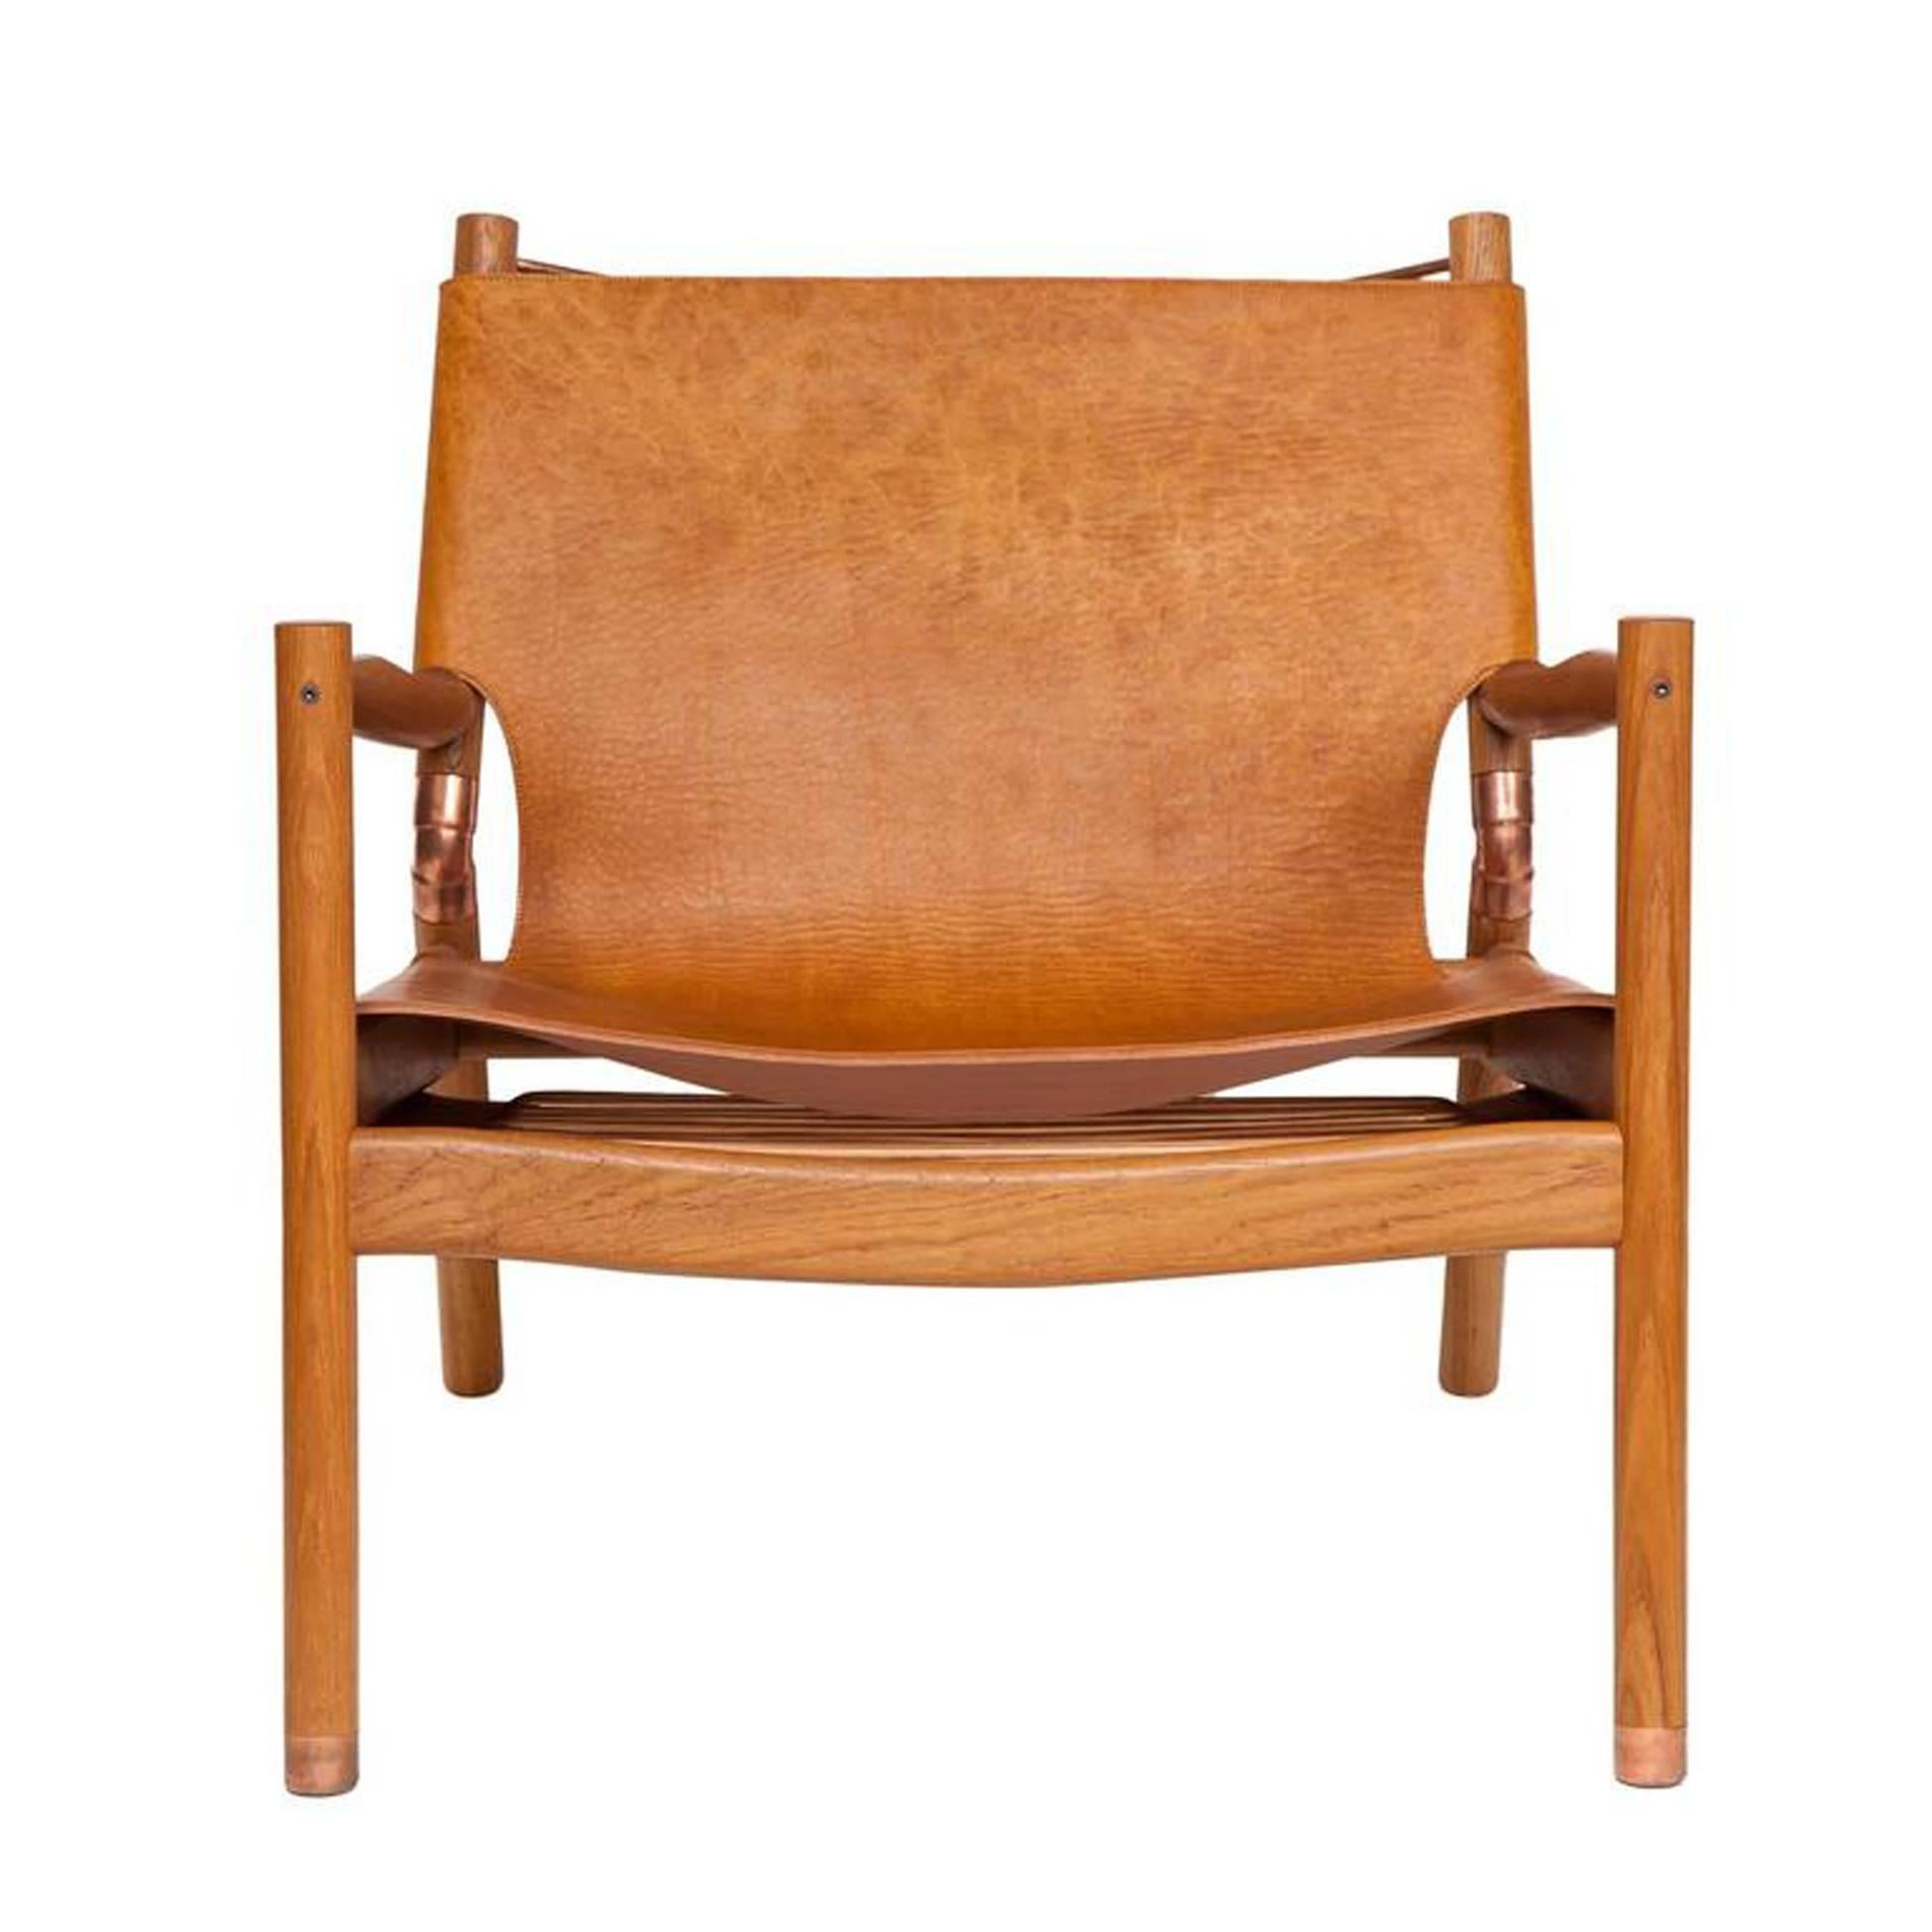 Erickson aesthetics slung leather teak lounge chair.

Custom orders have a lead time of 10-12 weeks FOB NYC. Lead time contingent upon selection of finishes, approval of shop drawings (if applicable), and receipt COM (if applicable). Multiple